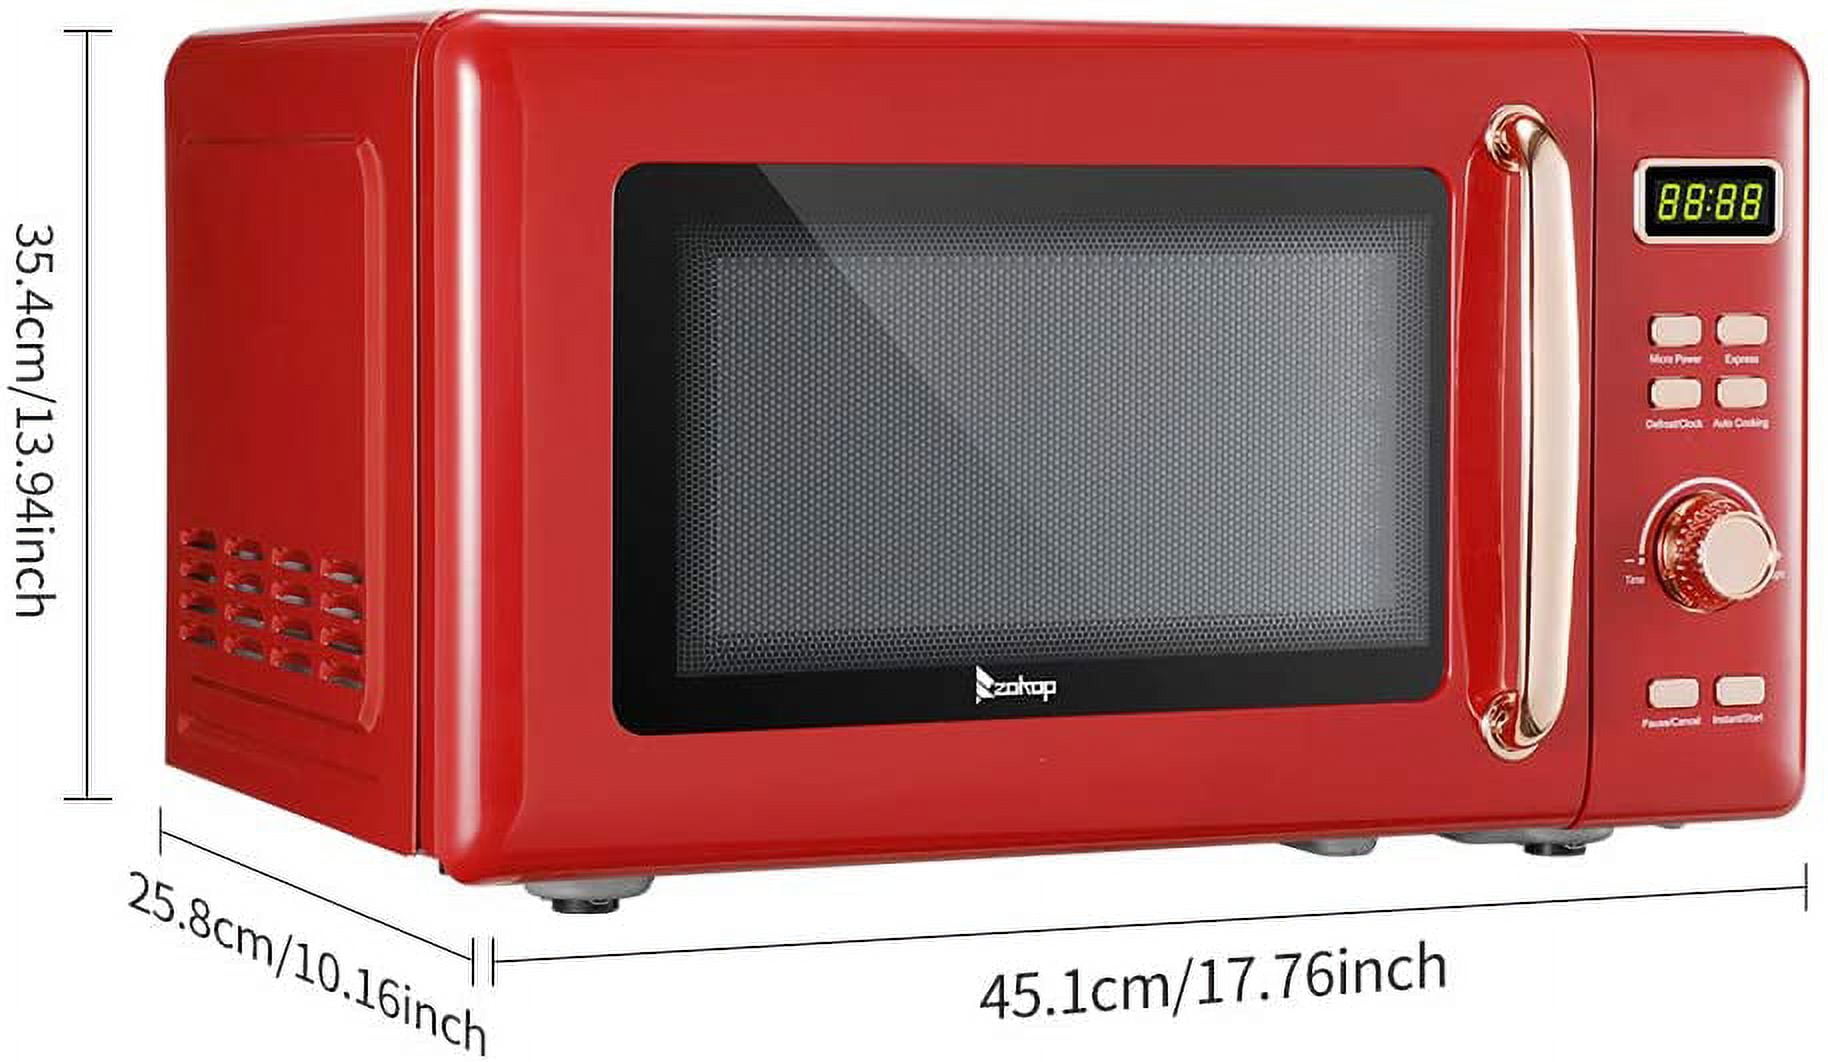 Retro Small Microwave Oven With Compact Size, 9 Preset Menus,  Position-Memory Turntable, Mute Function, Countertop Microwave Per -  AliExpress